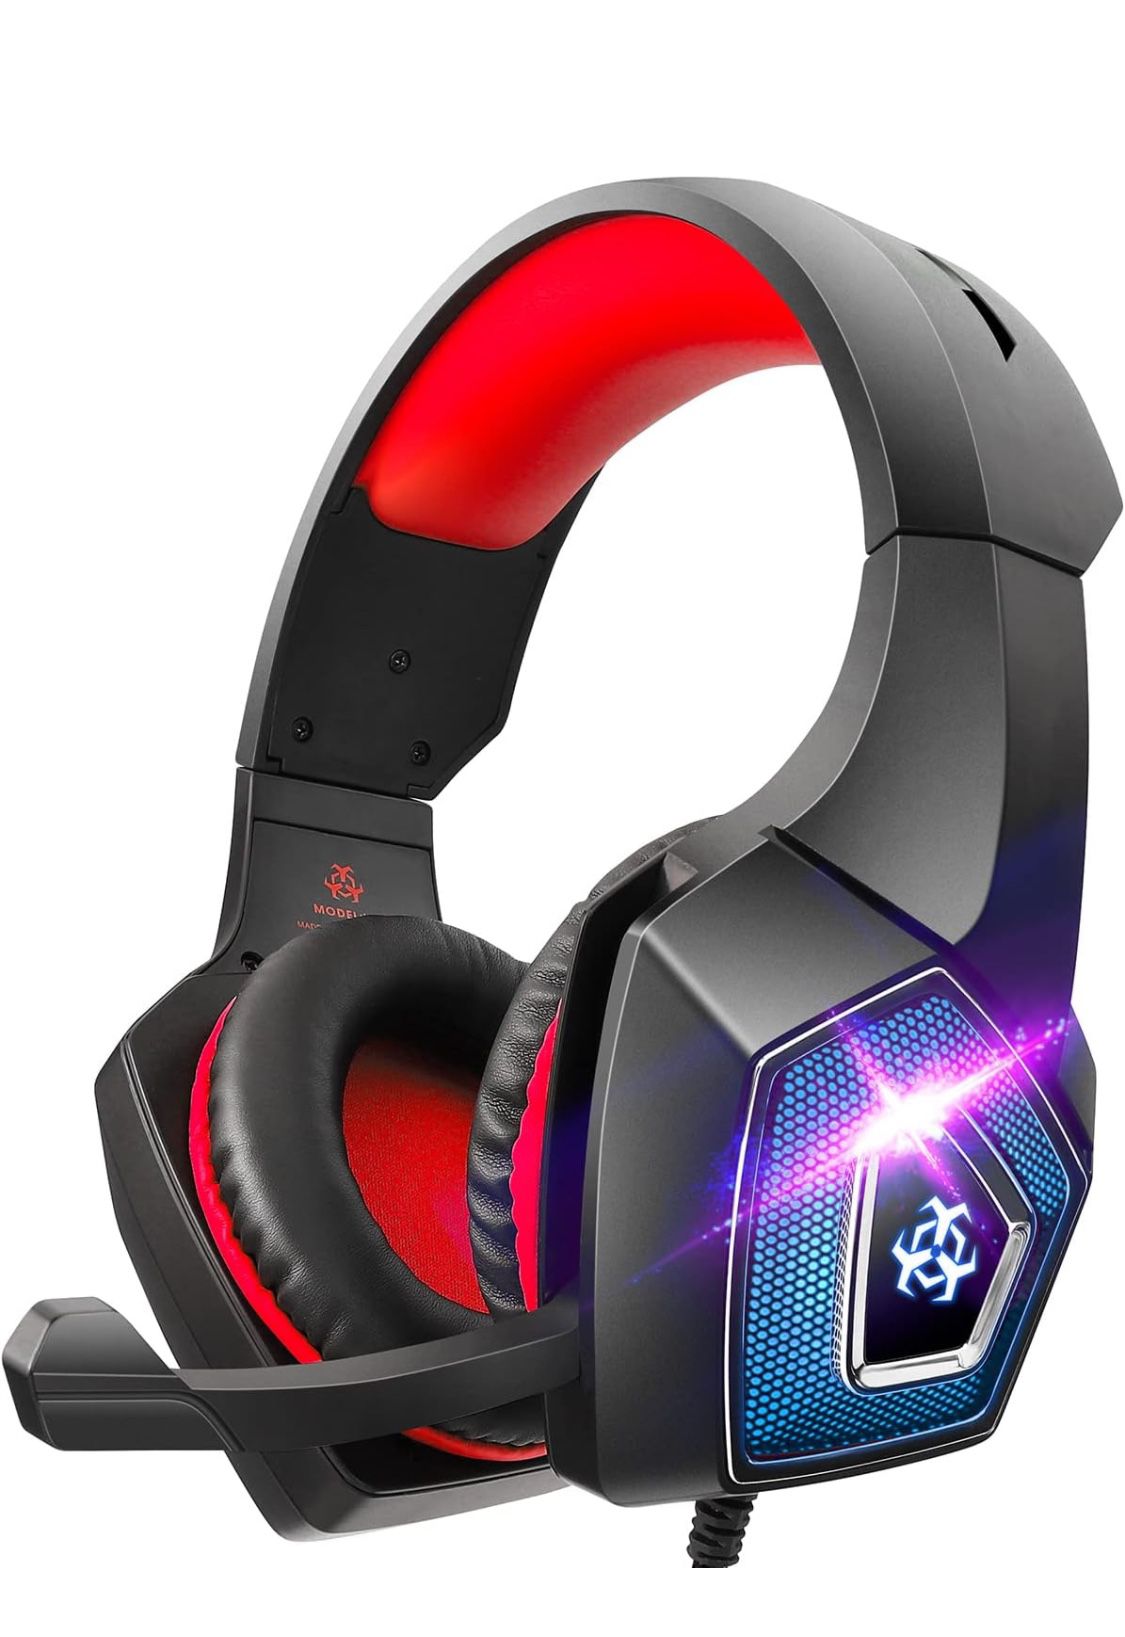 New! Gaming Headset V1 for Pc Mac Laptop Games, Led Light Headphone Stereo 3.5 Mm Wired Over Ear Ps4 with Noise Cancelling Microphone